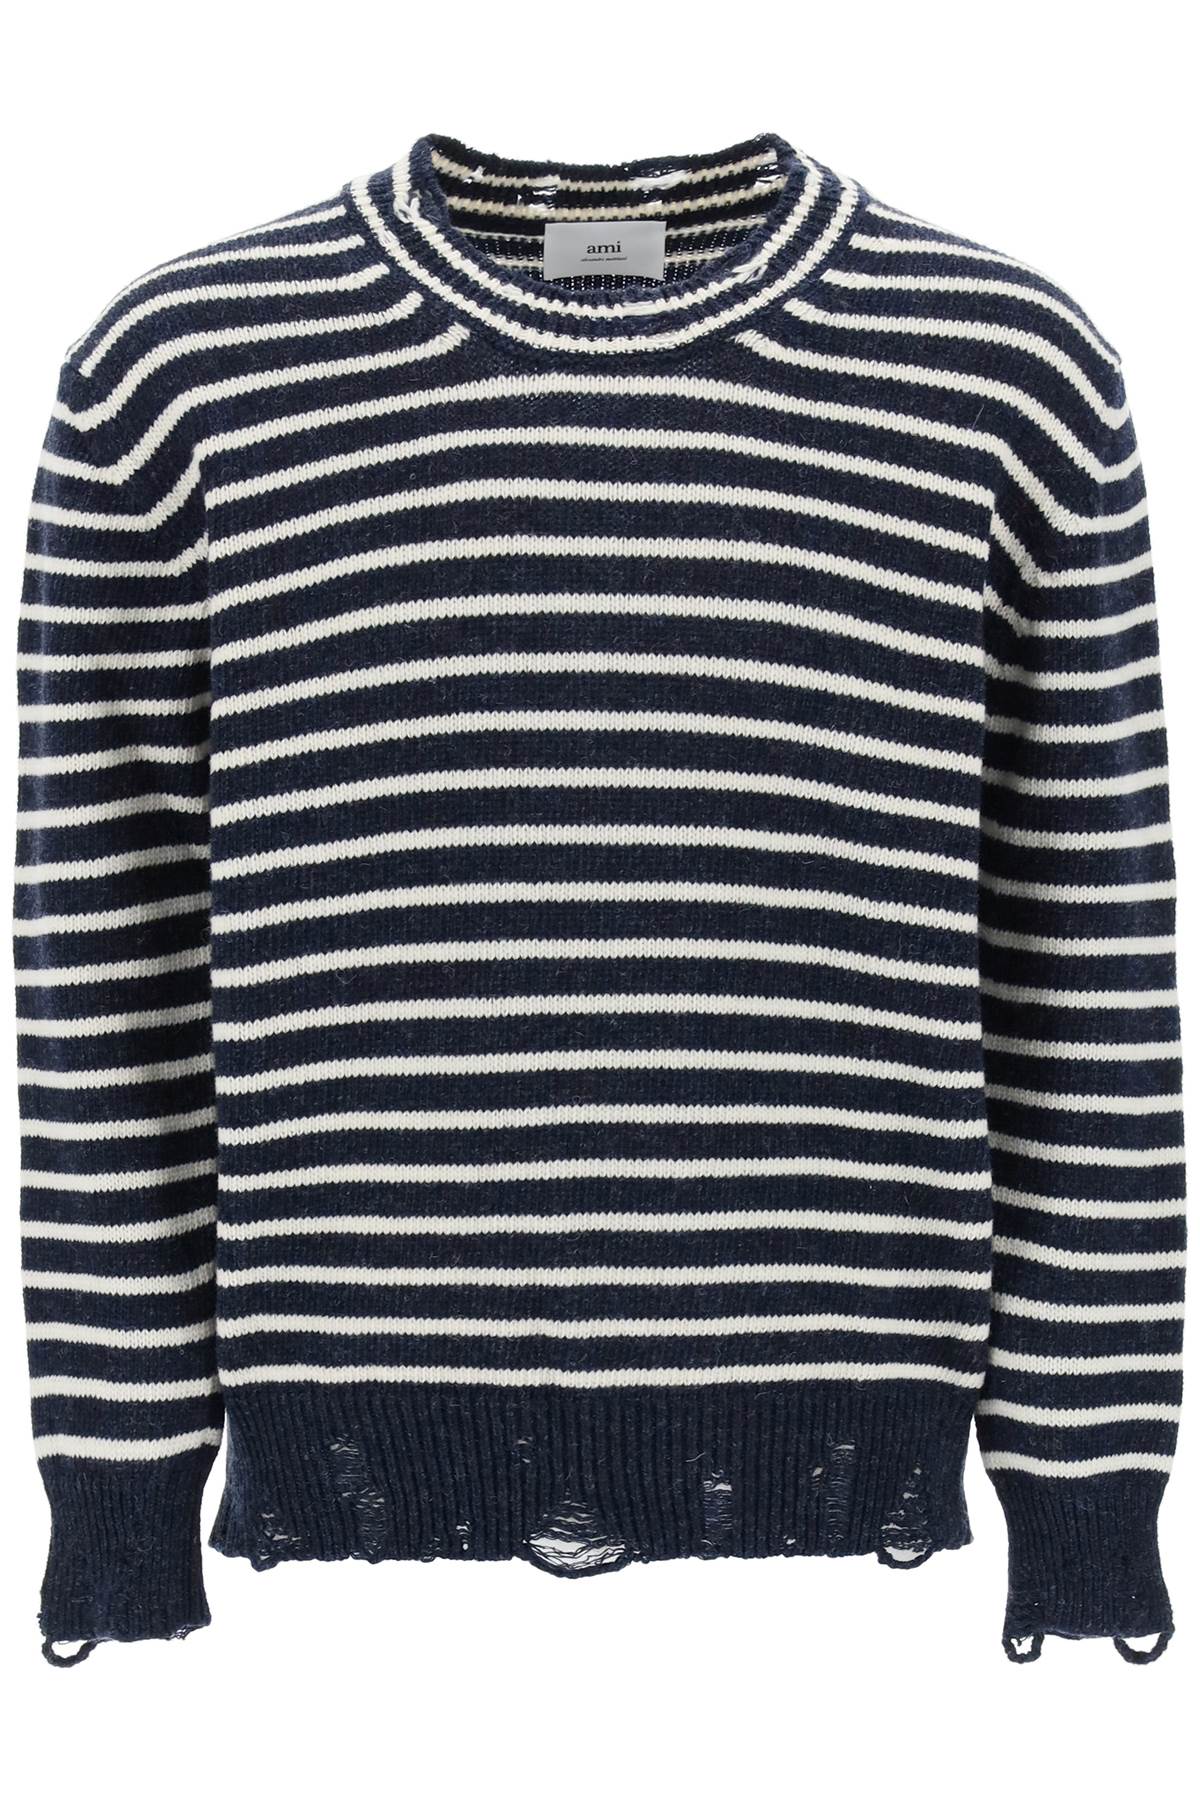 AMI ALEXANDRE MATTIUSSI STRIPED SWEATER WITH DESTROYED DETAILING